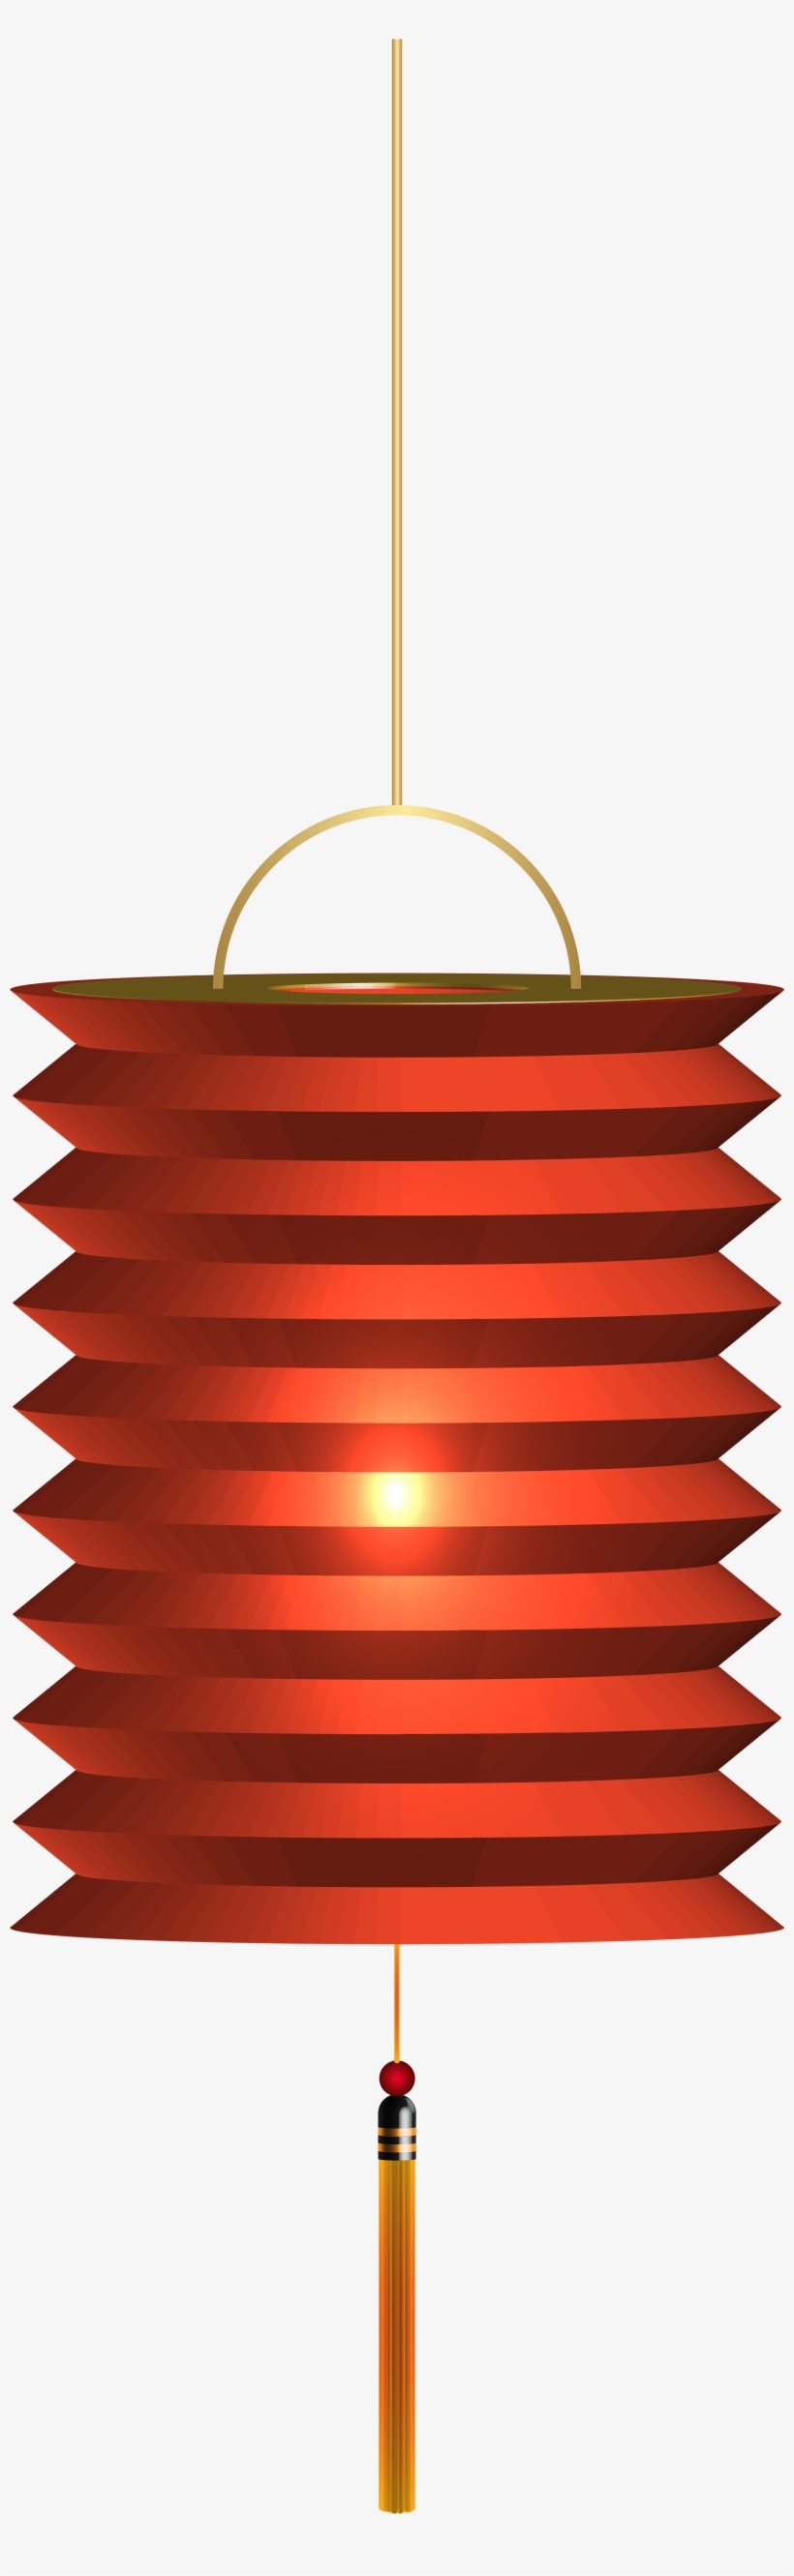 Chinese Red Paper Lantern Png Clip Art - Portable Network Graphics, transparent png #242030